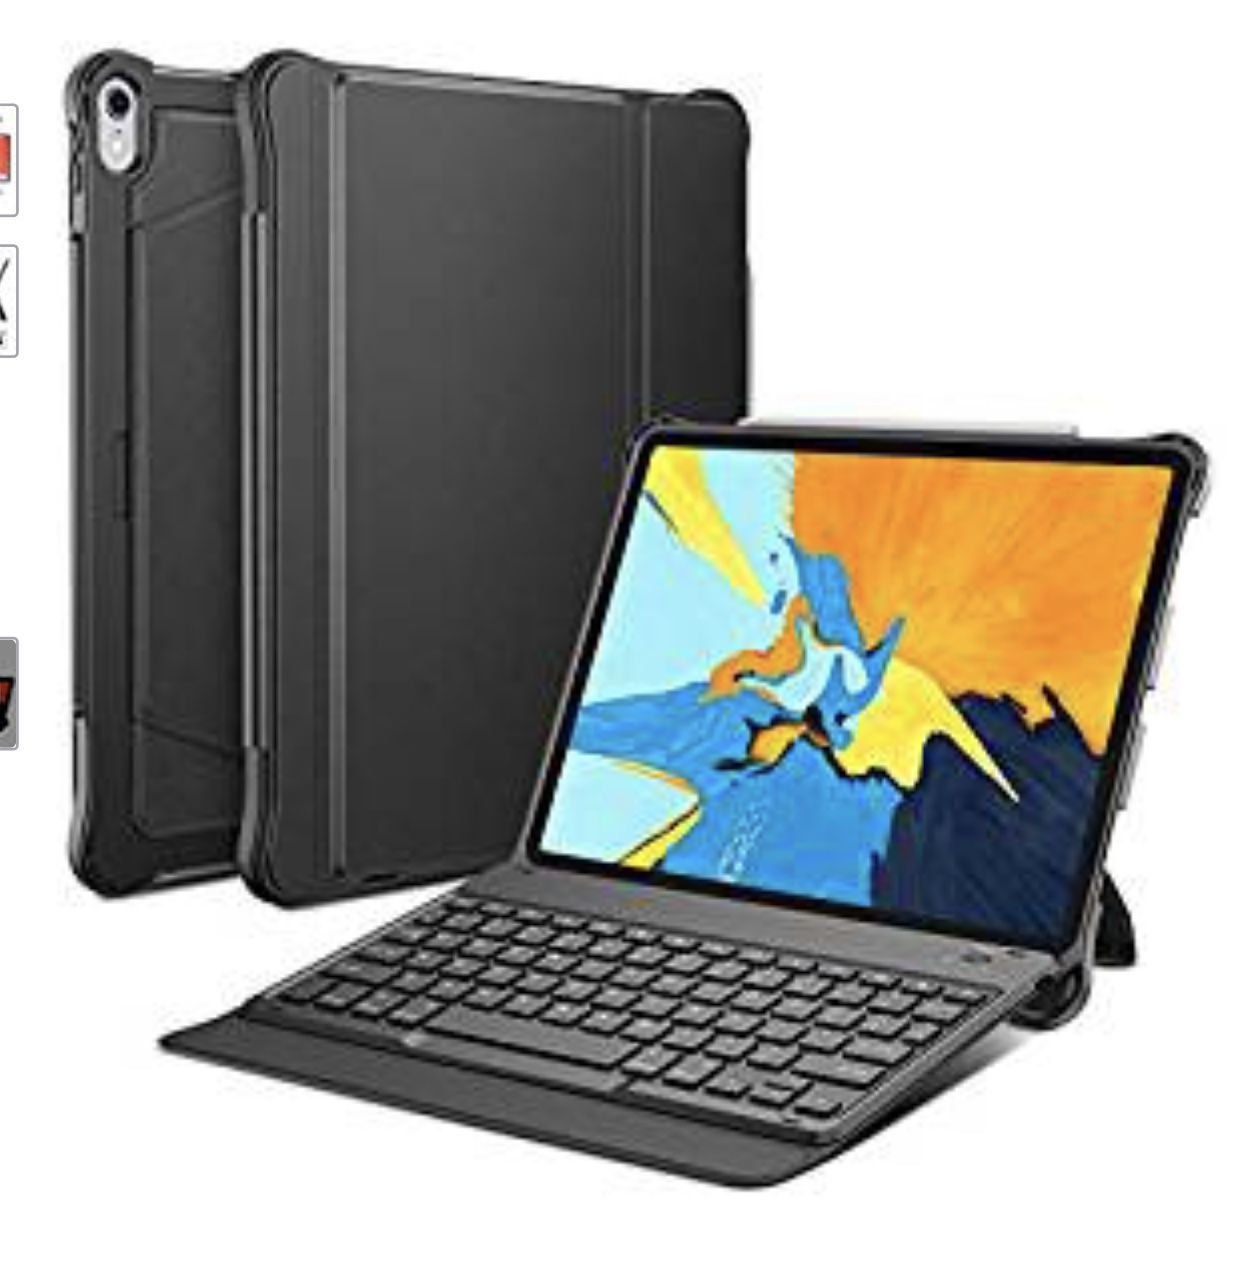 Keyboard Case for New iPad Pro 11 inch 2018 Released, Ultra-Thin Detachable Bluetooth Keyboard Case with Built-in Stand and Pencil Holder, Black